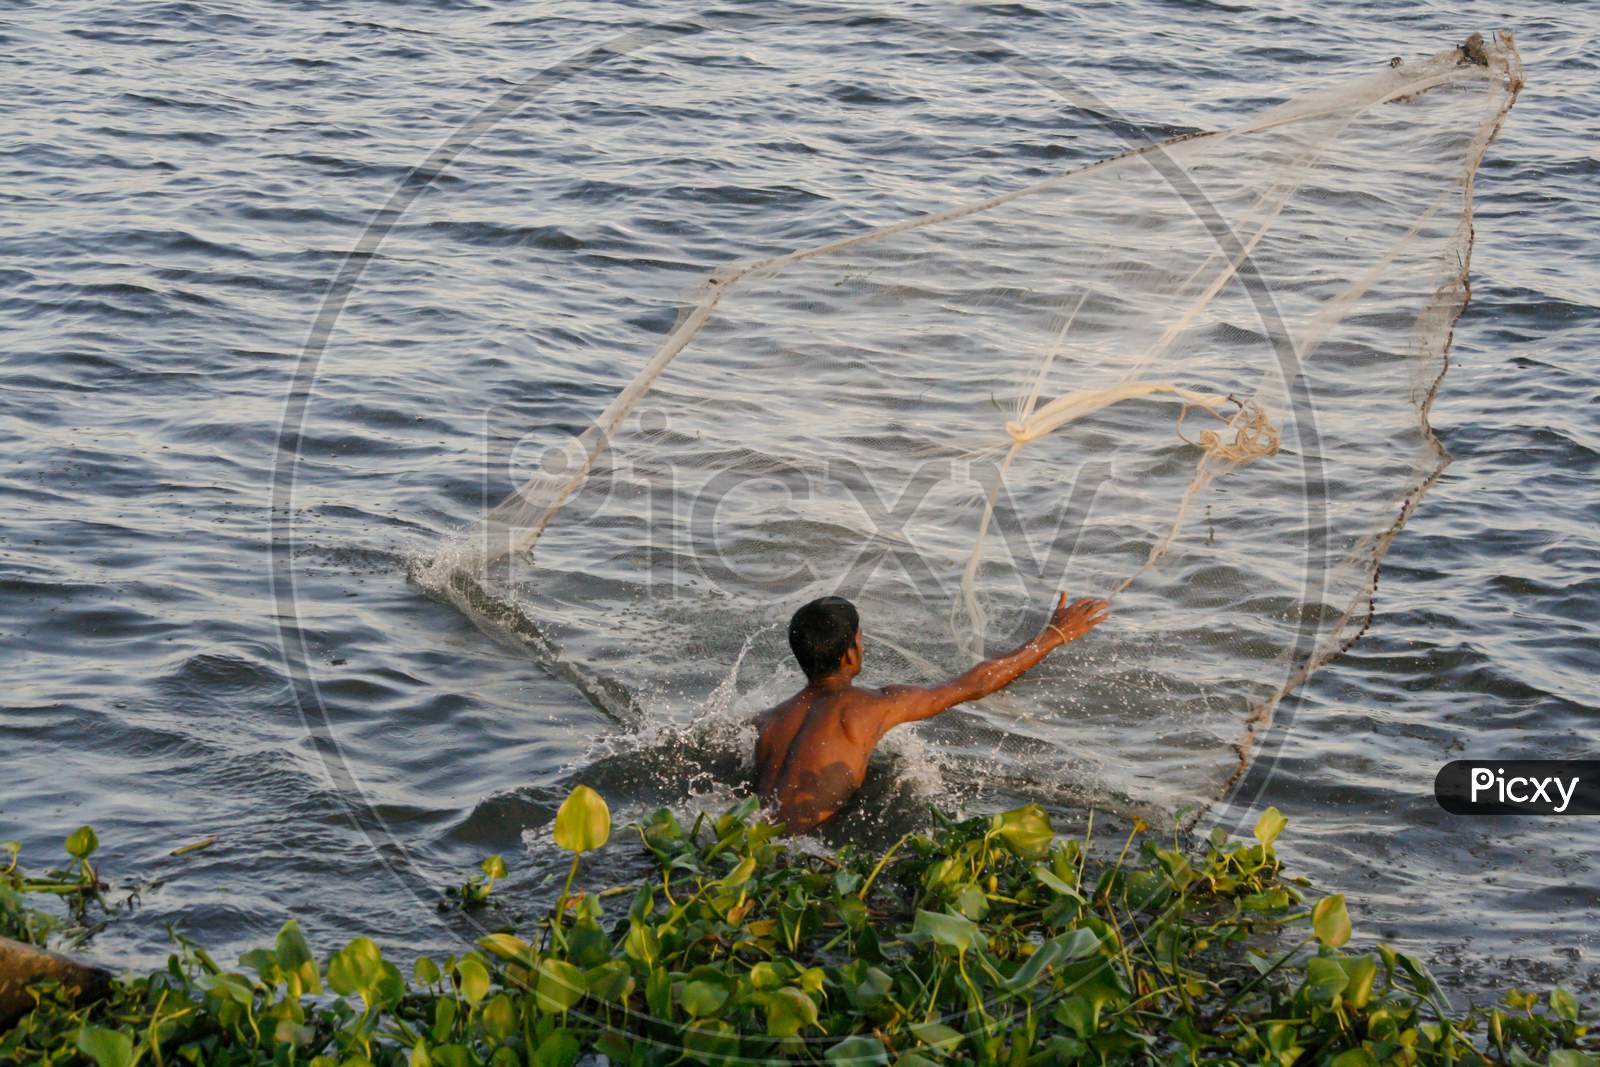 Image of A shirtless fisherman throwing fishing net into river to